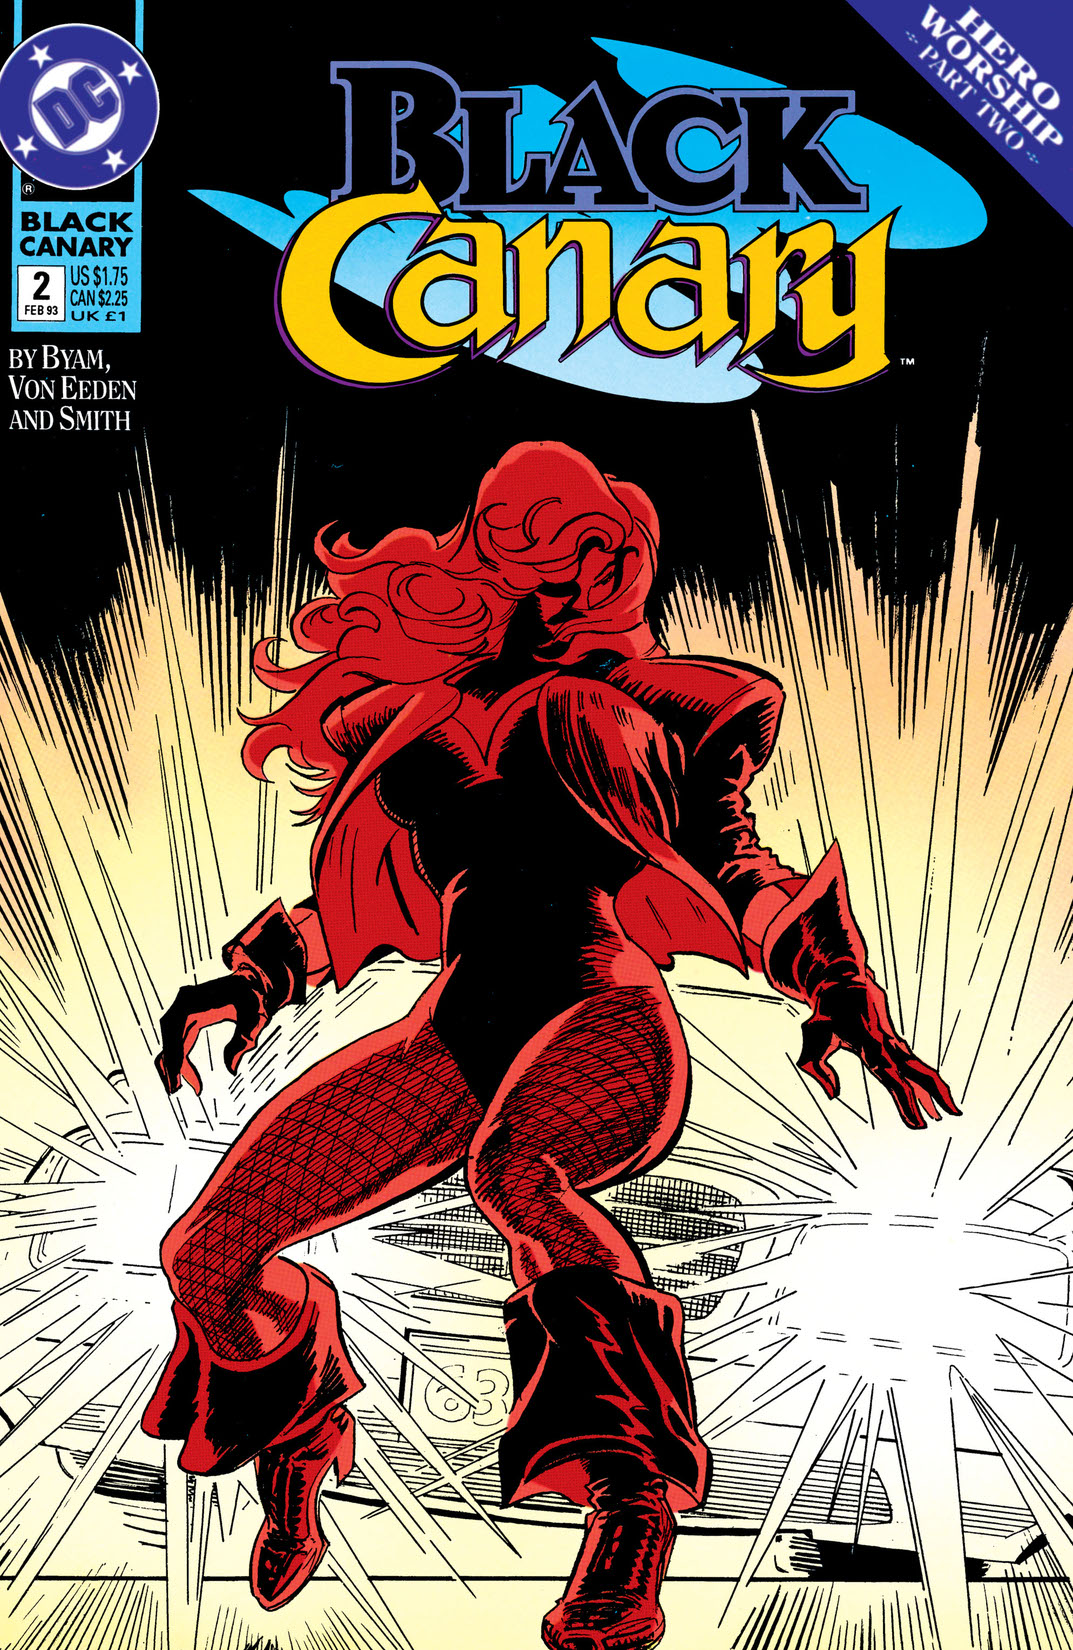 Black Canary (1992-) #2 preview images